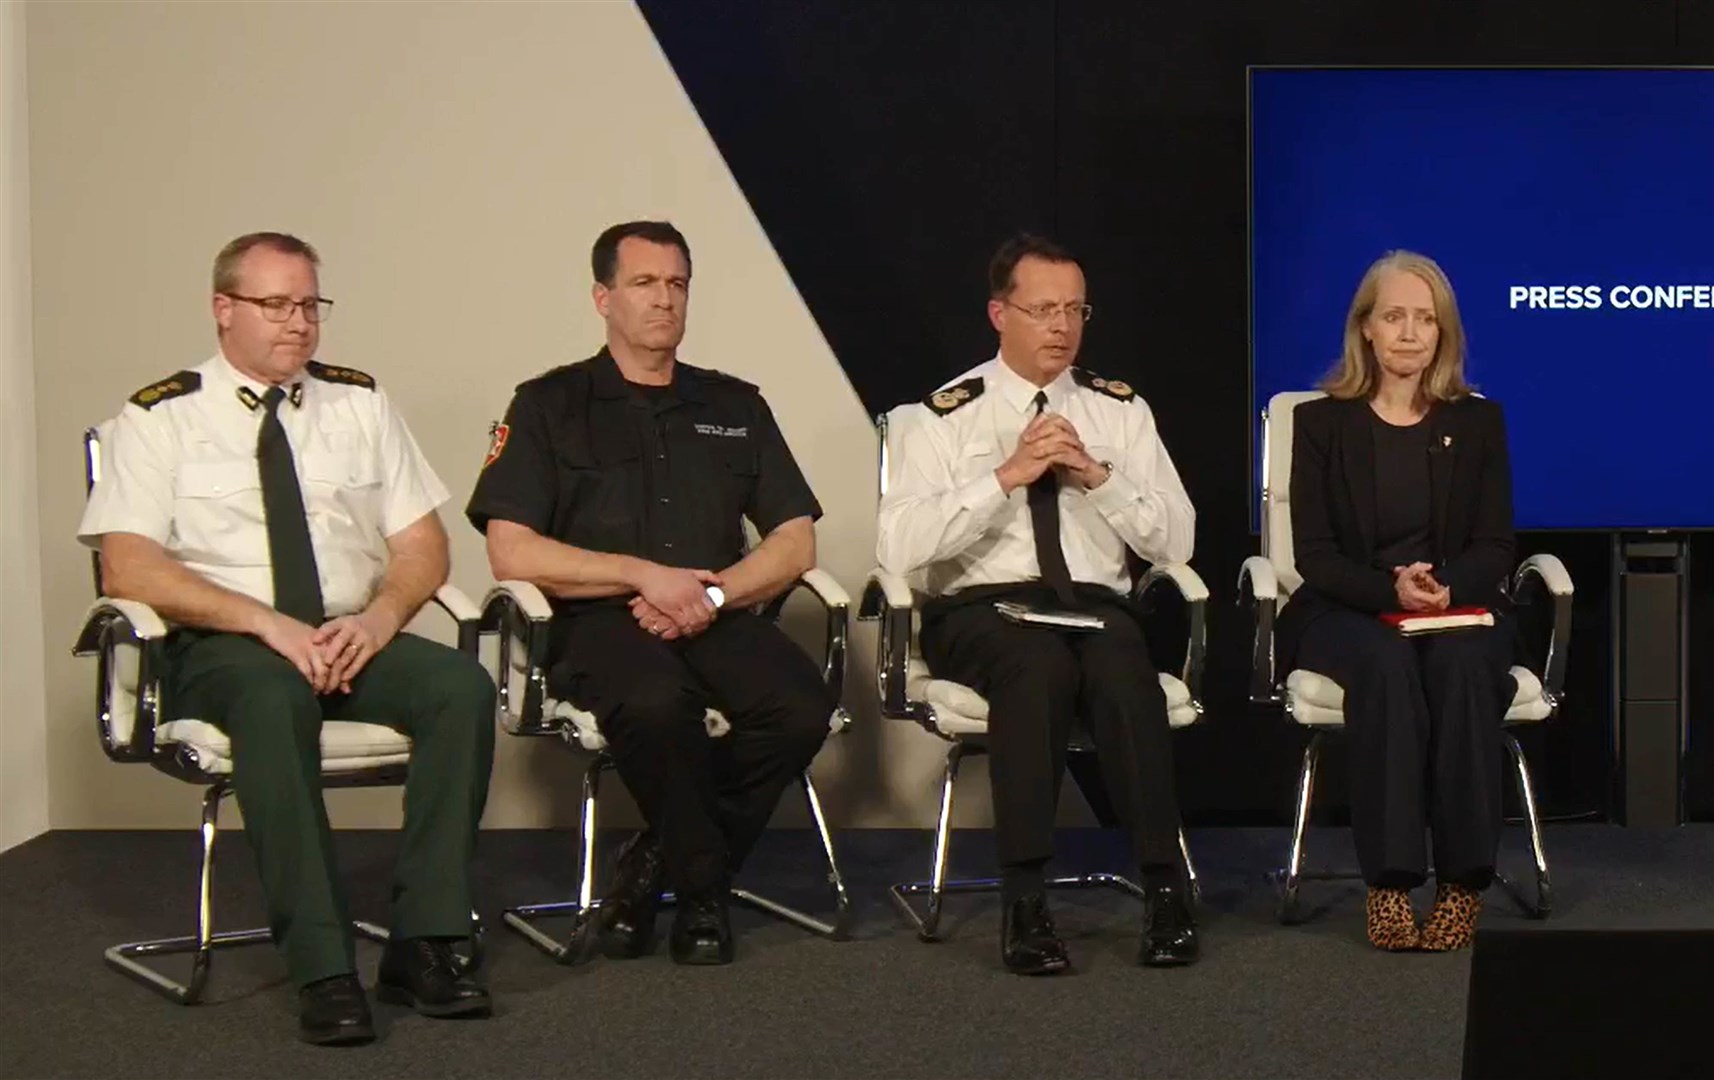 (left to right) chief ambulance officer Peter Gavey, chief fire officer Paul Brown, States of Jersey Police chief officer Robin Smith and Chief minister of Jersey, Kristina Moore (Government of Jersey/Facebook)